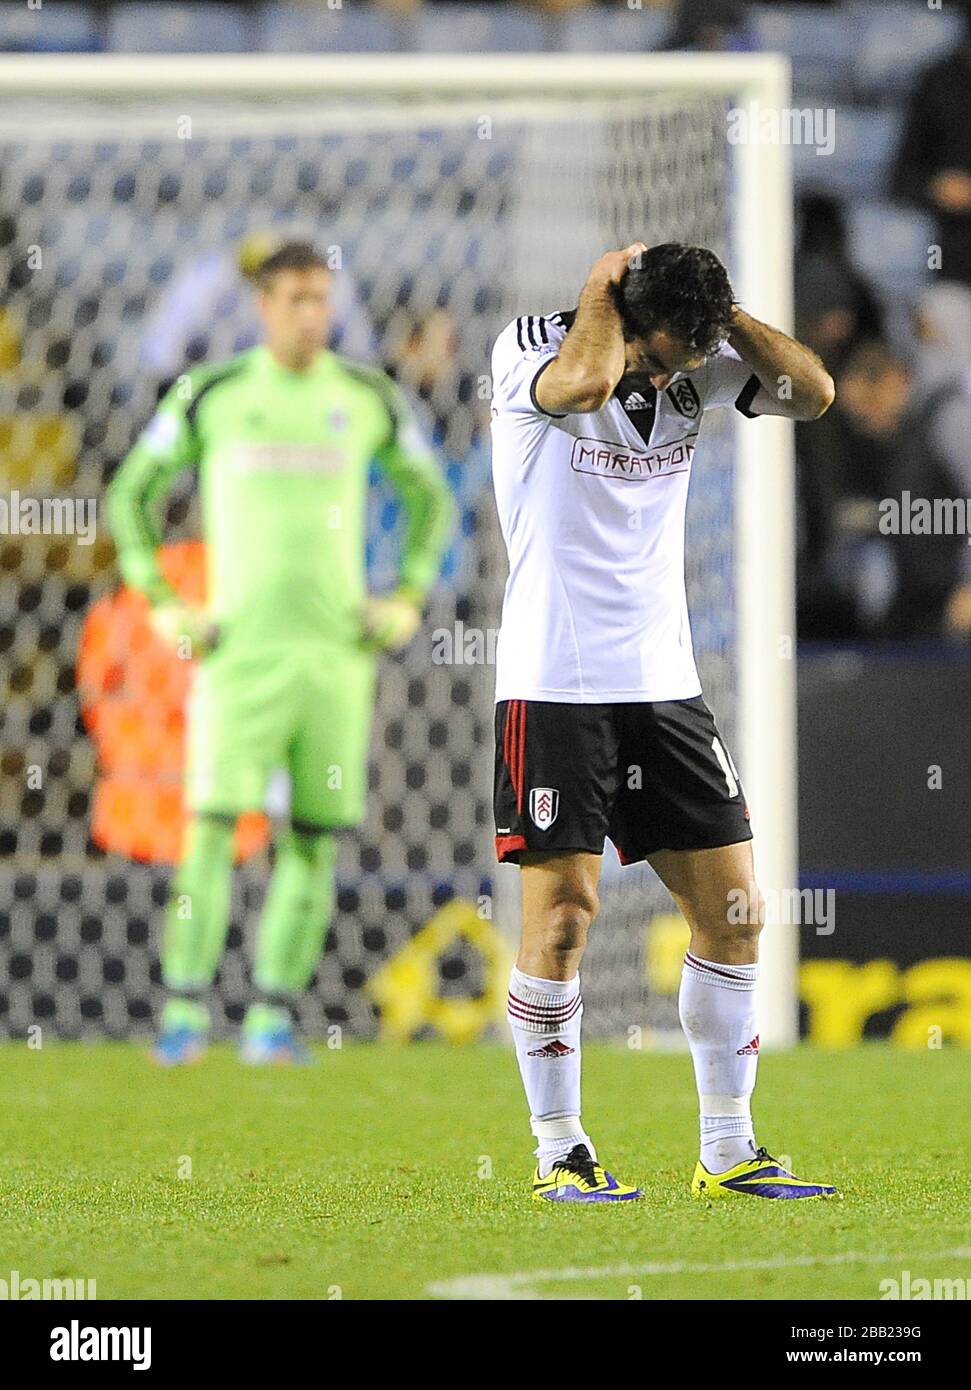 Fulham's Giorgos Karagounis stands dejected after conceding a goal Stock Photo